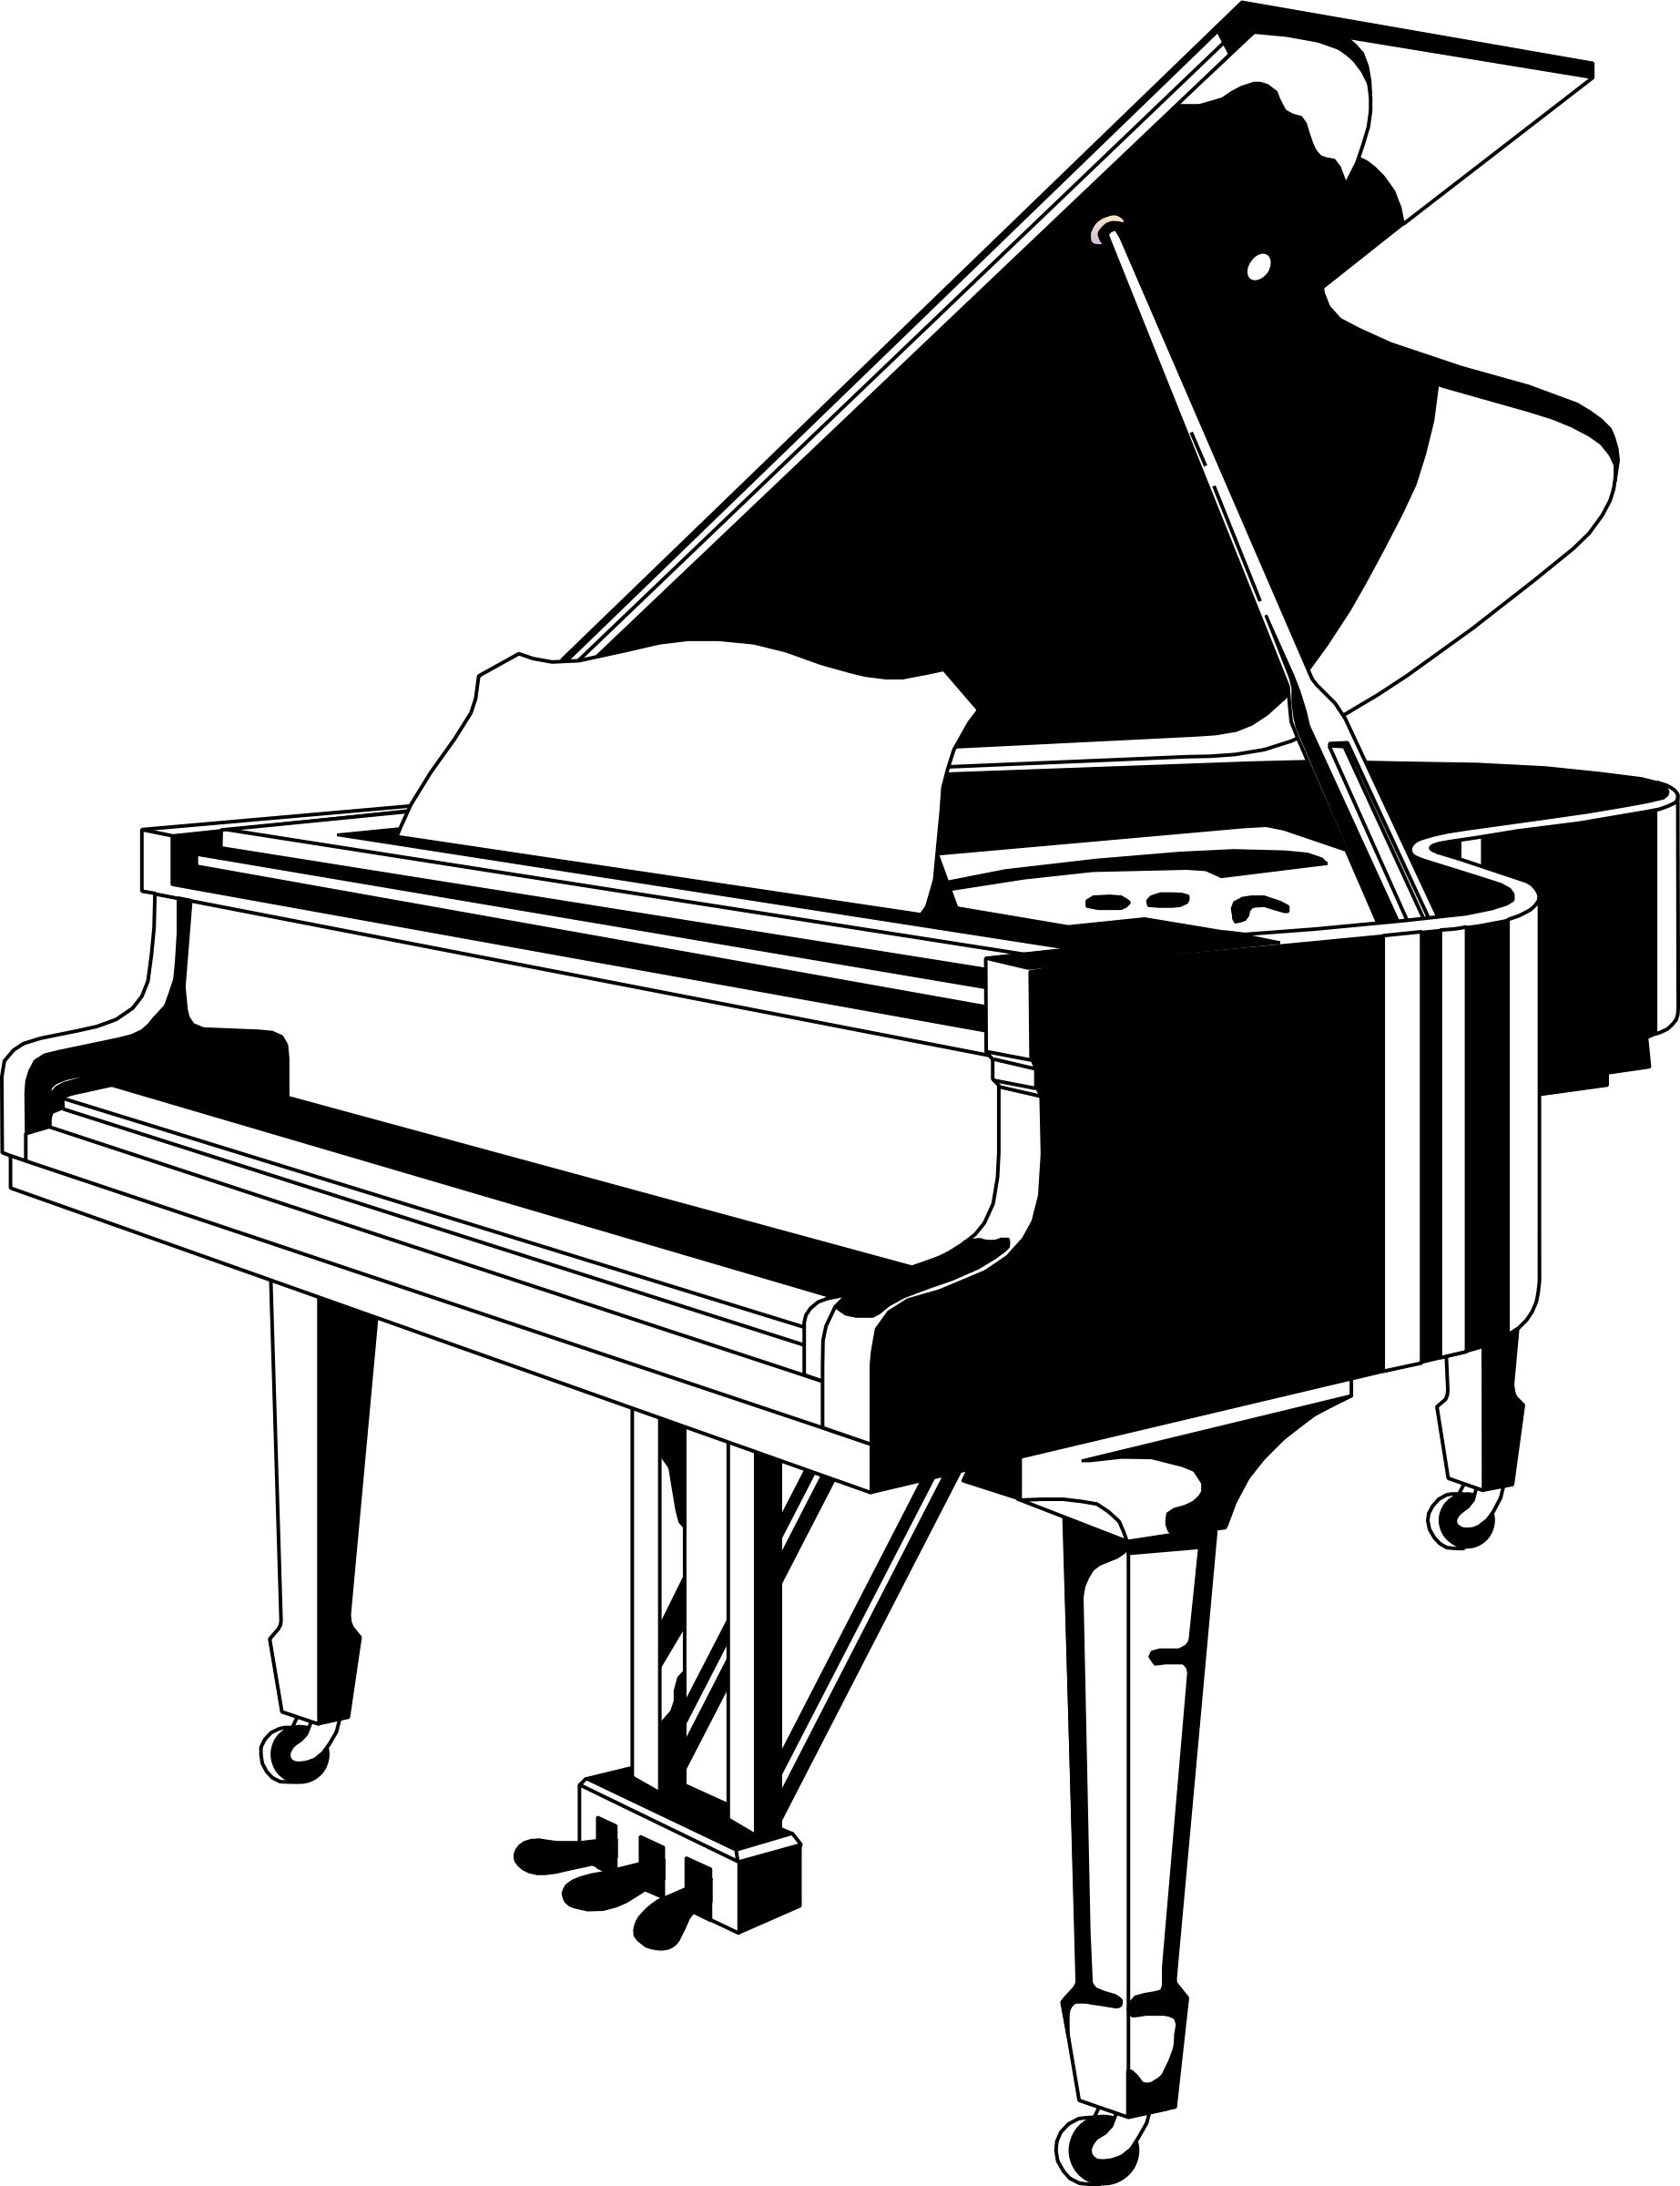 Piano clip art pictures free clipart images